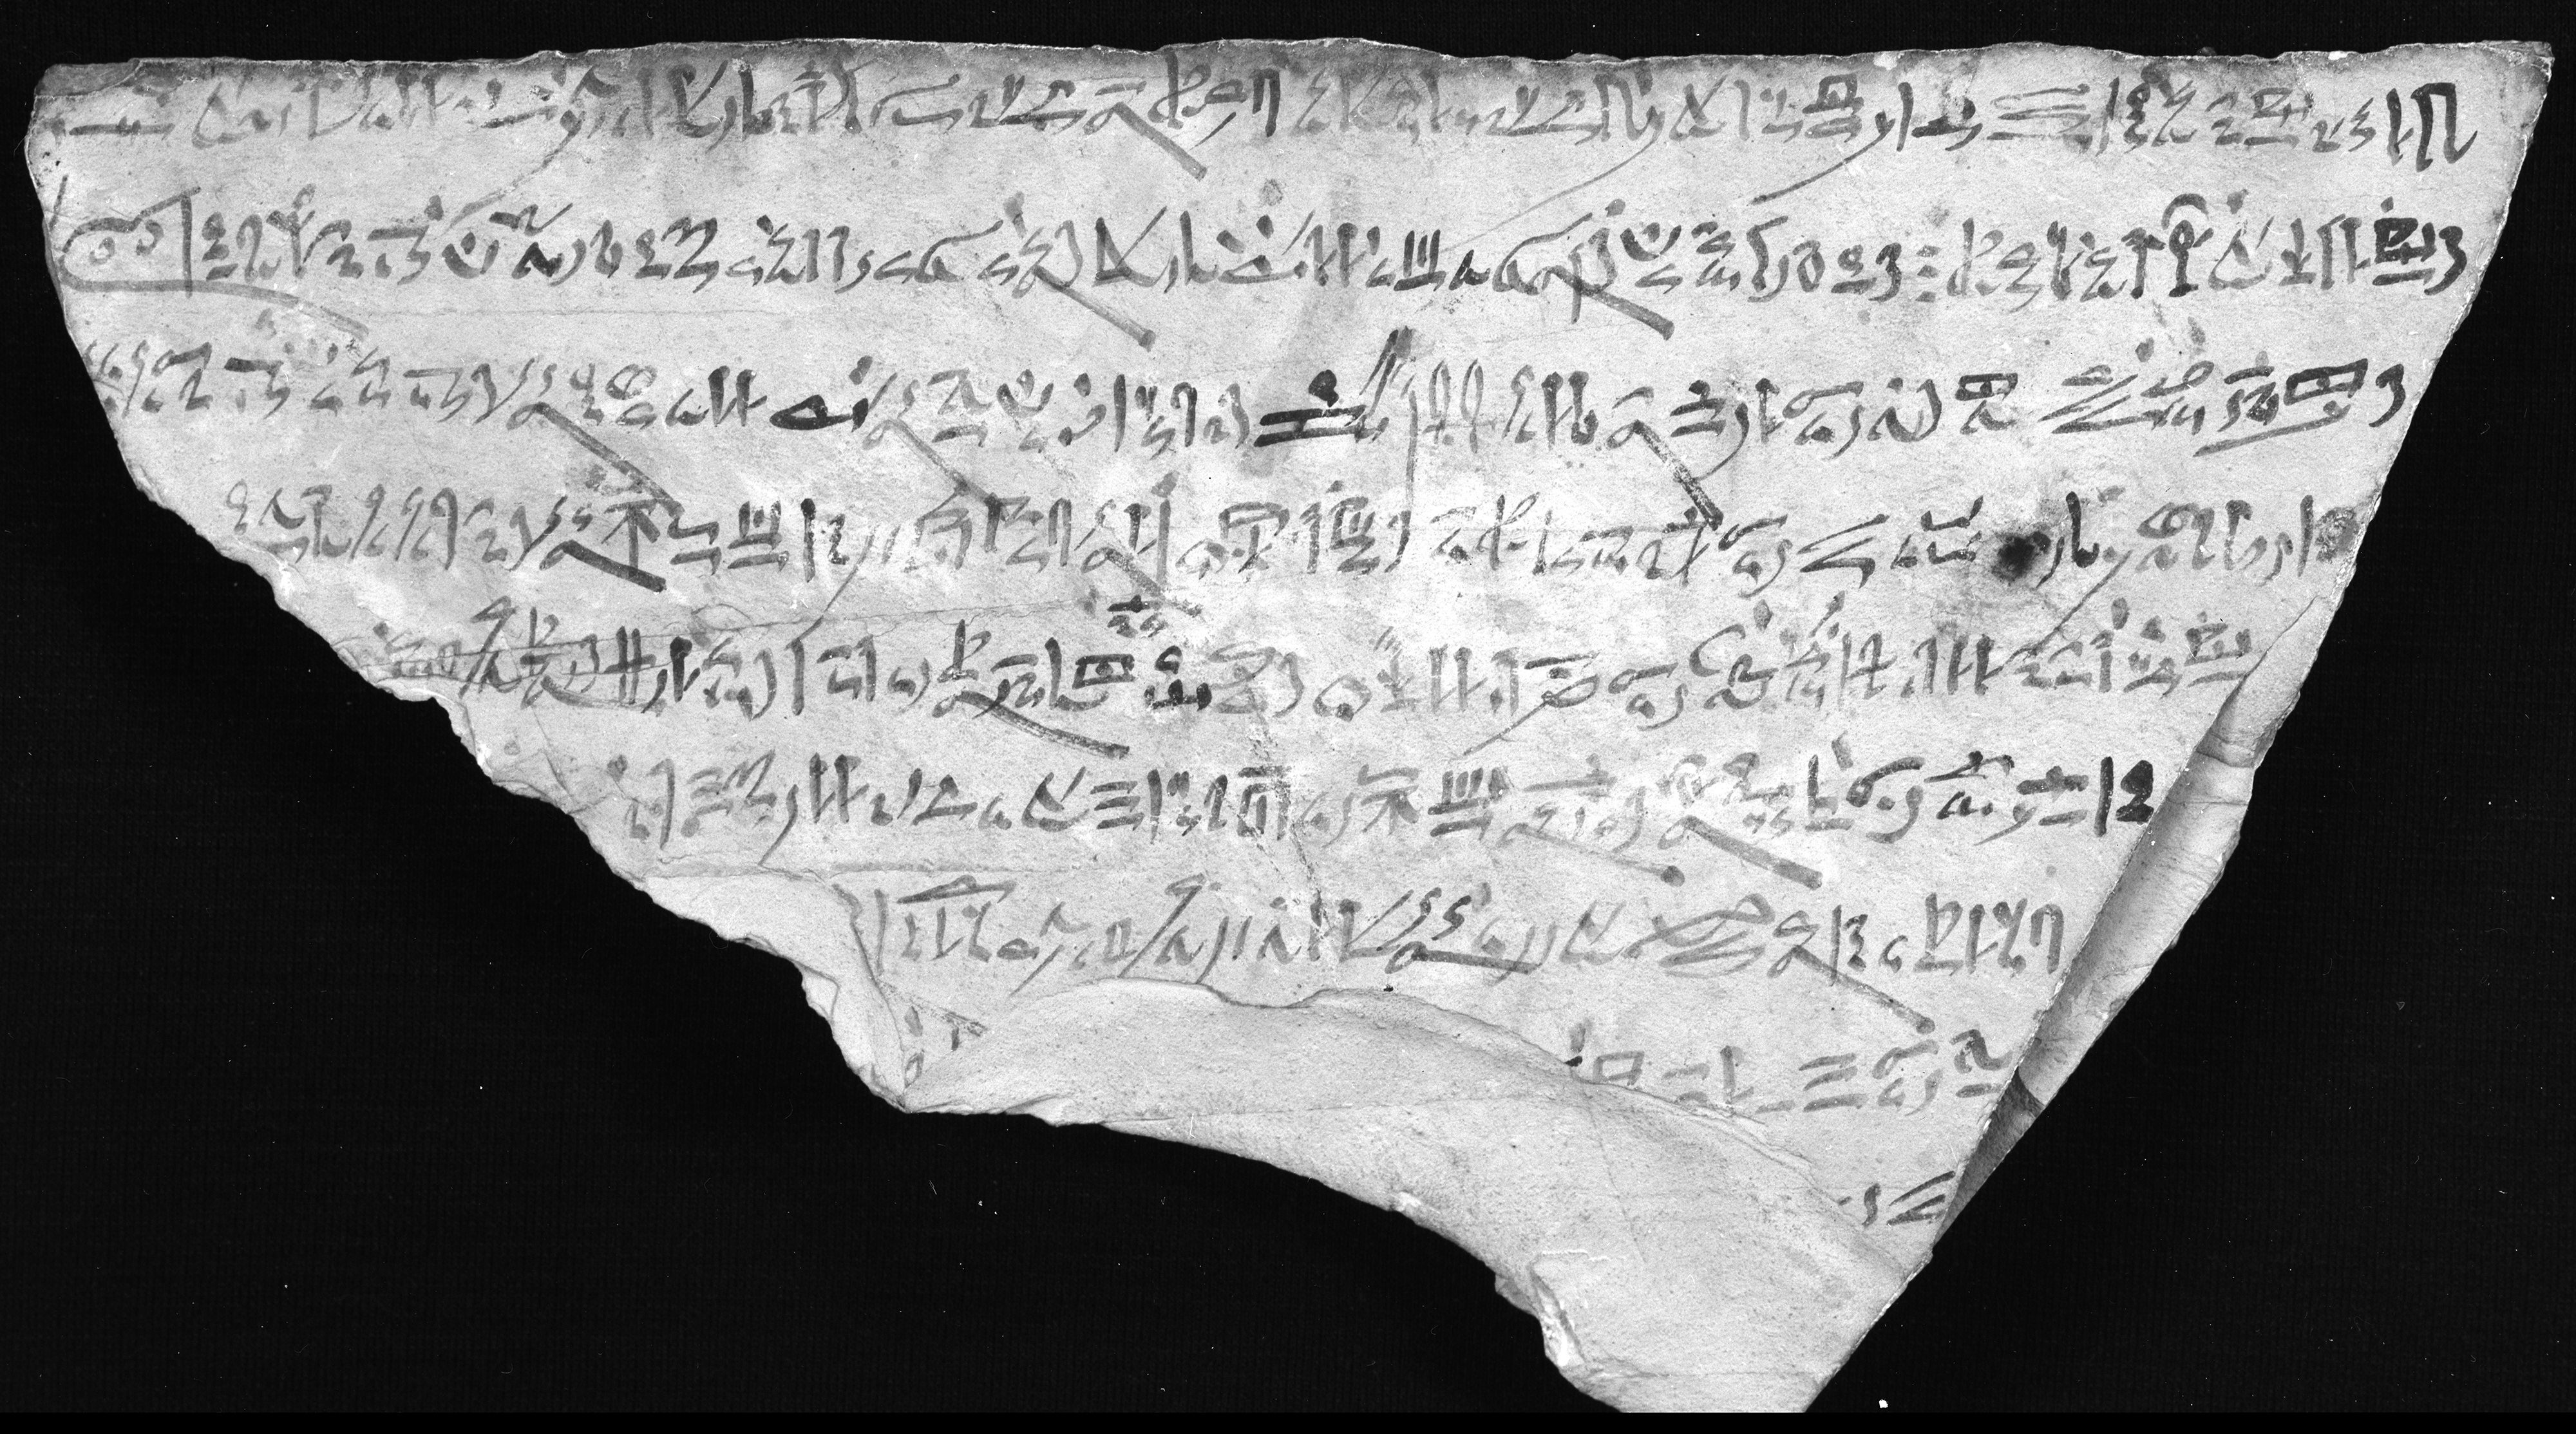 Image of O. Chicago OIM 12074 - Letter of Menna, ro.